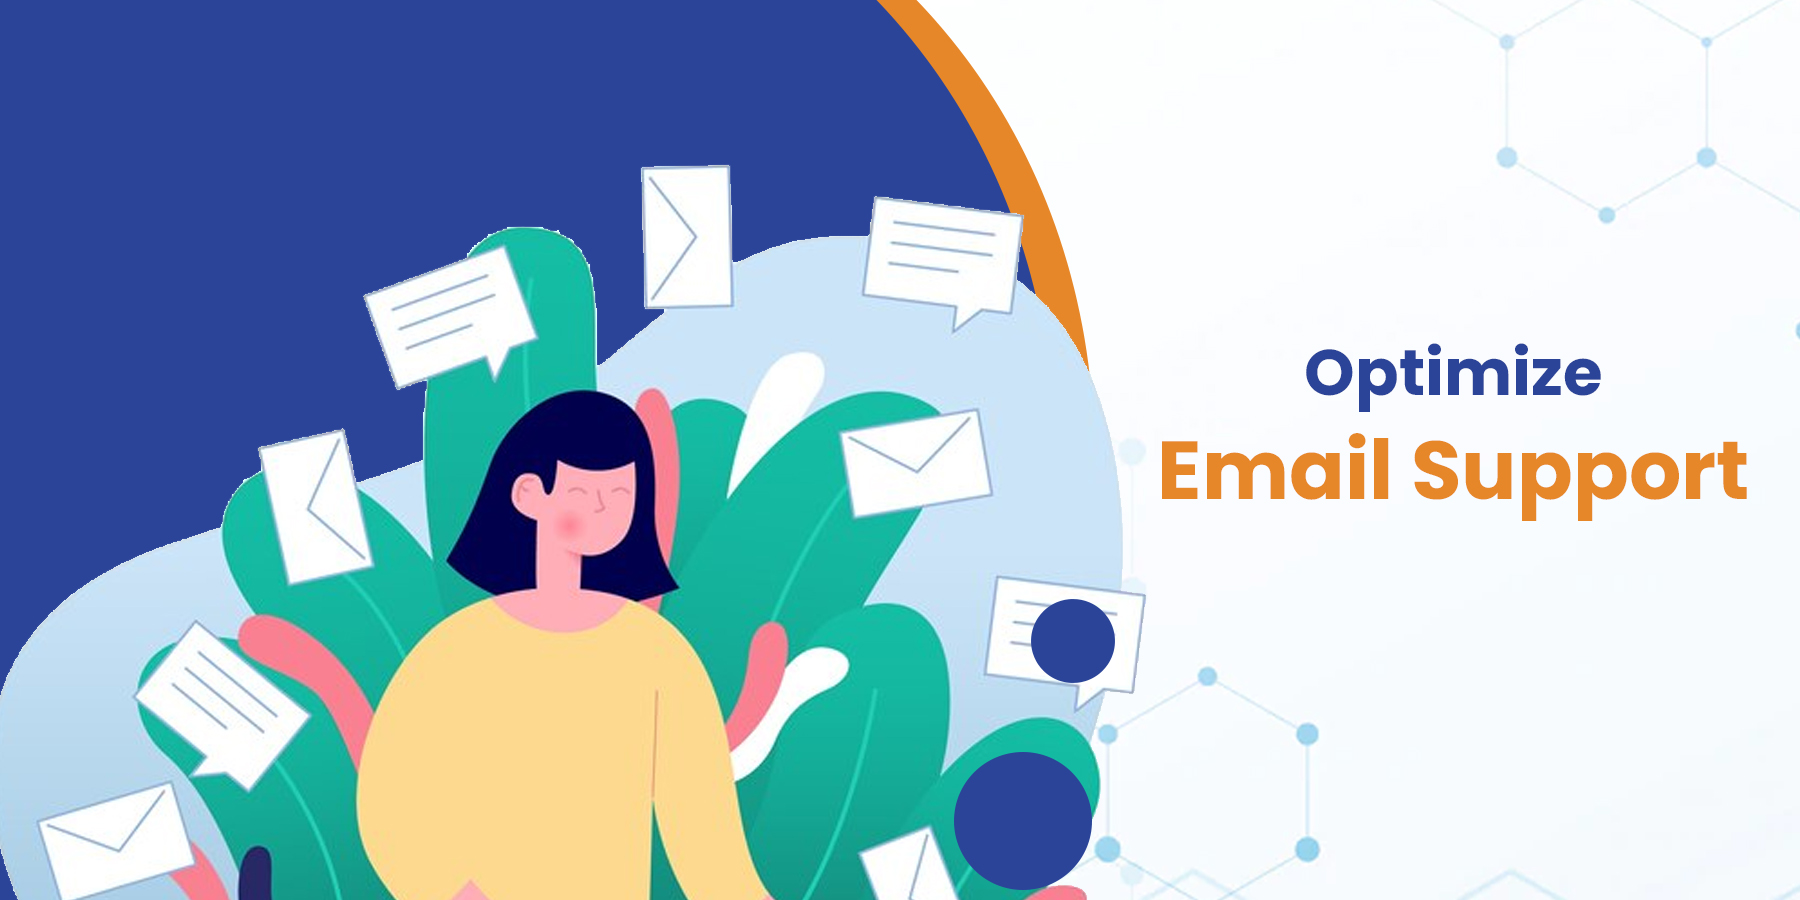 Optimize Email Support